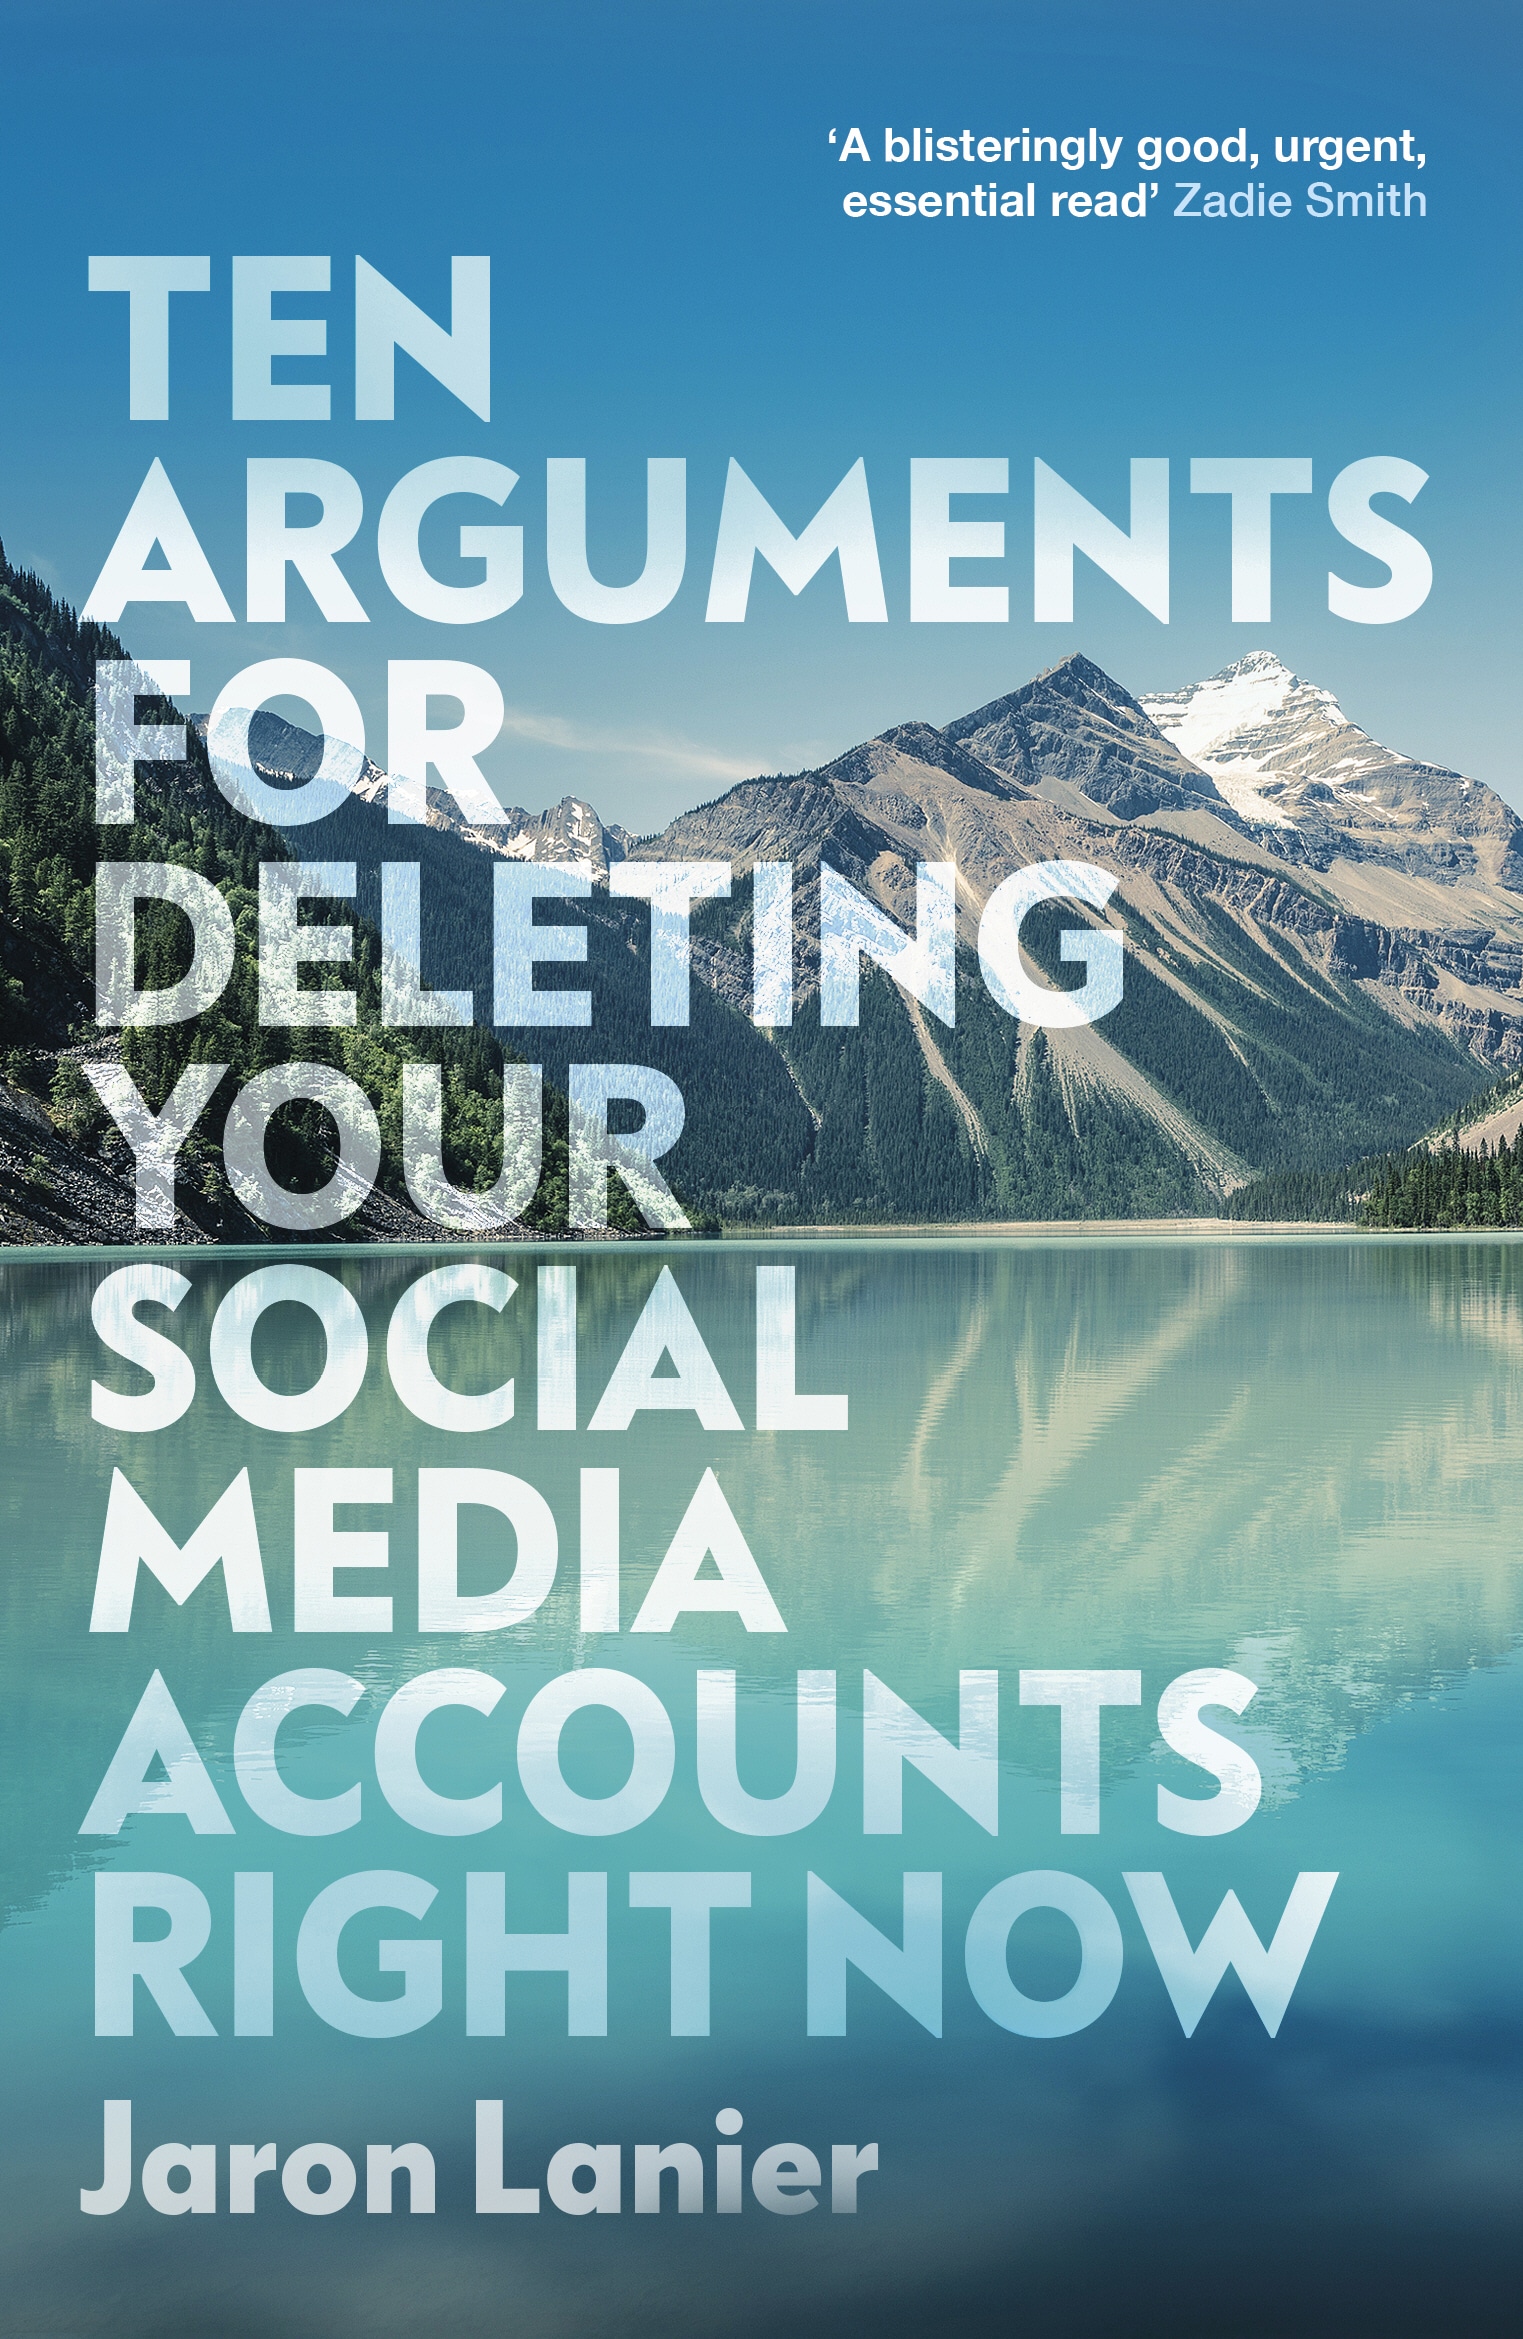 Book “Ten Arguments For Deleting Your Social Media Accounts Right Now” by Jaron Lanier — August 1, 2019